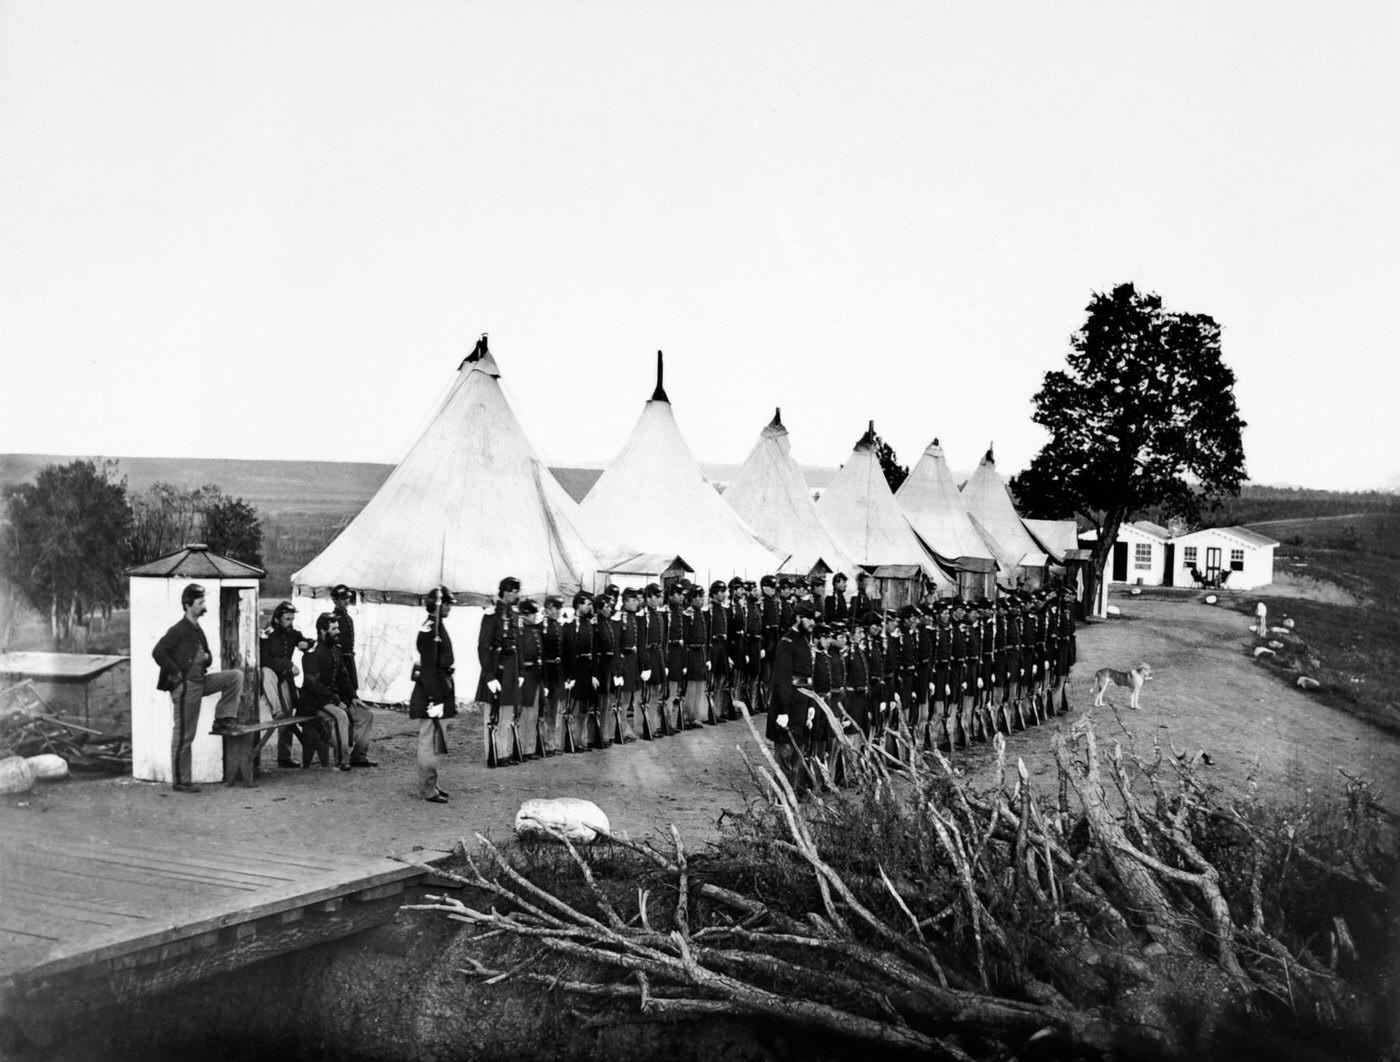 An infantry company on parade during the American Civil War, 1863.